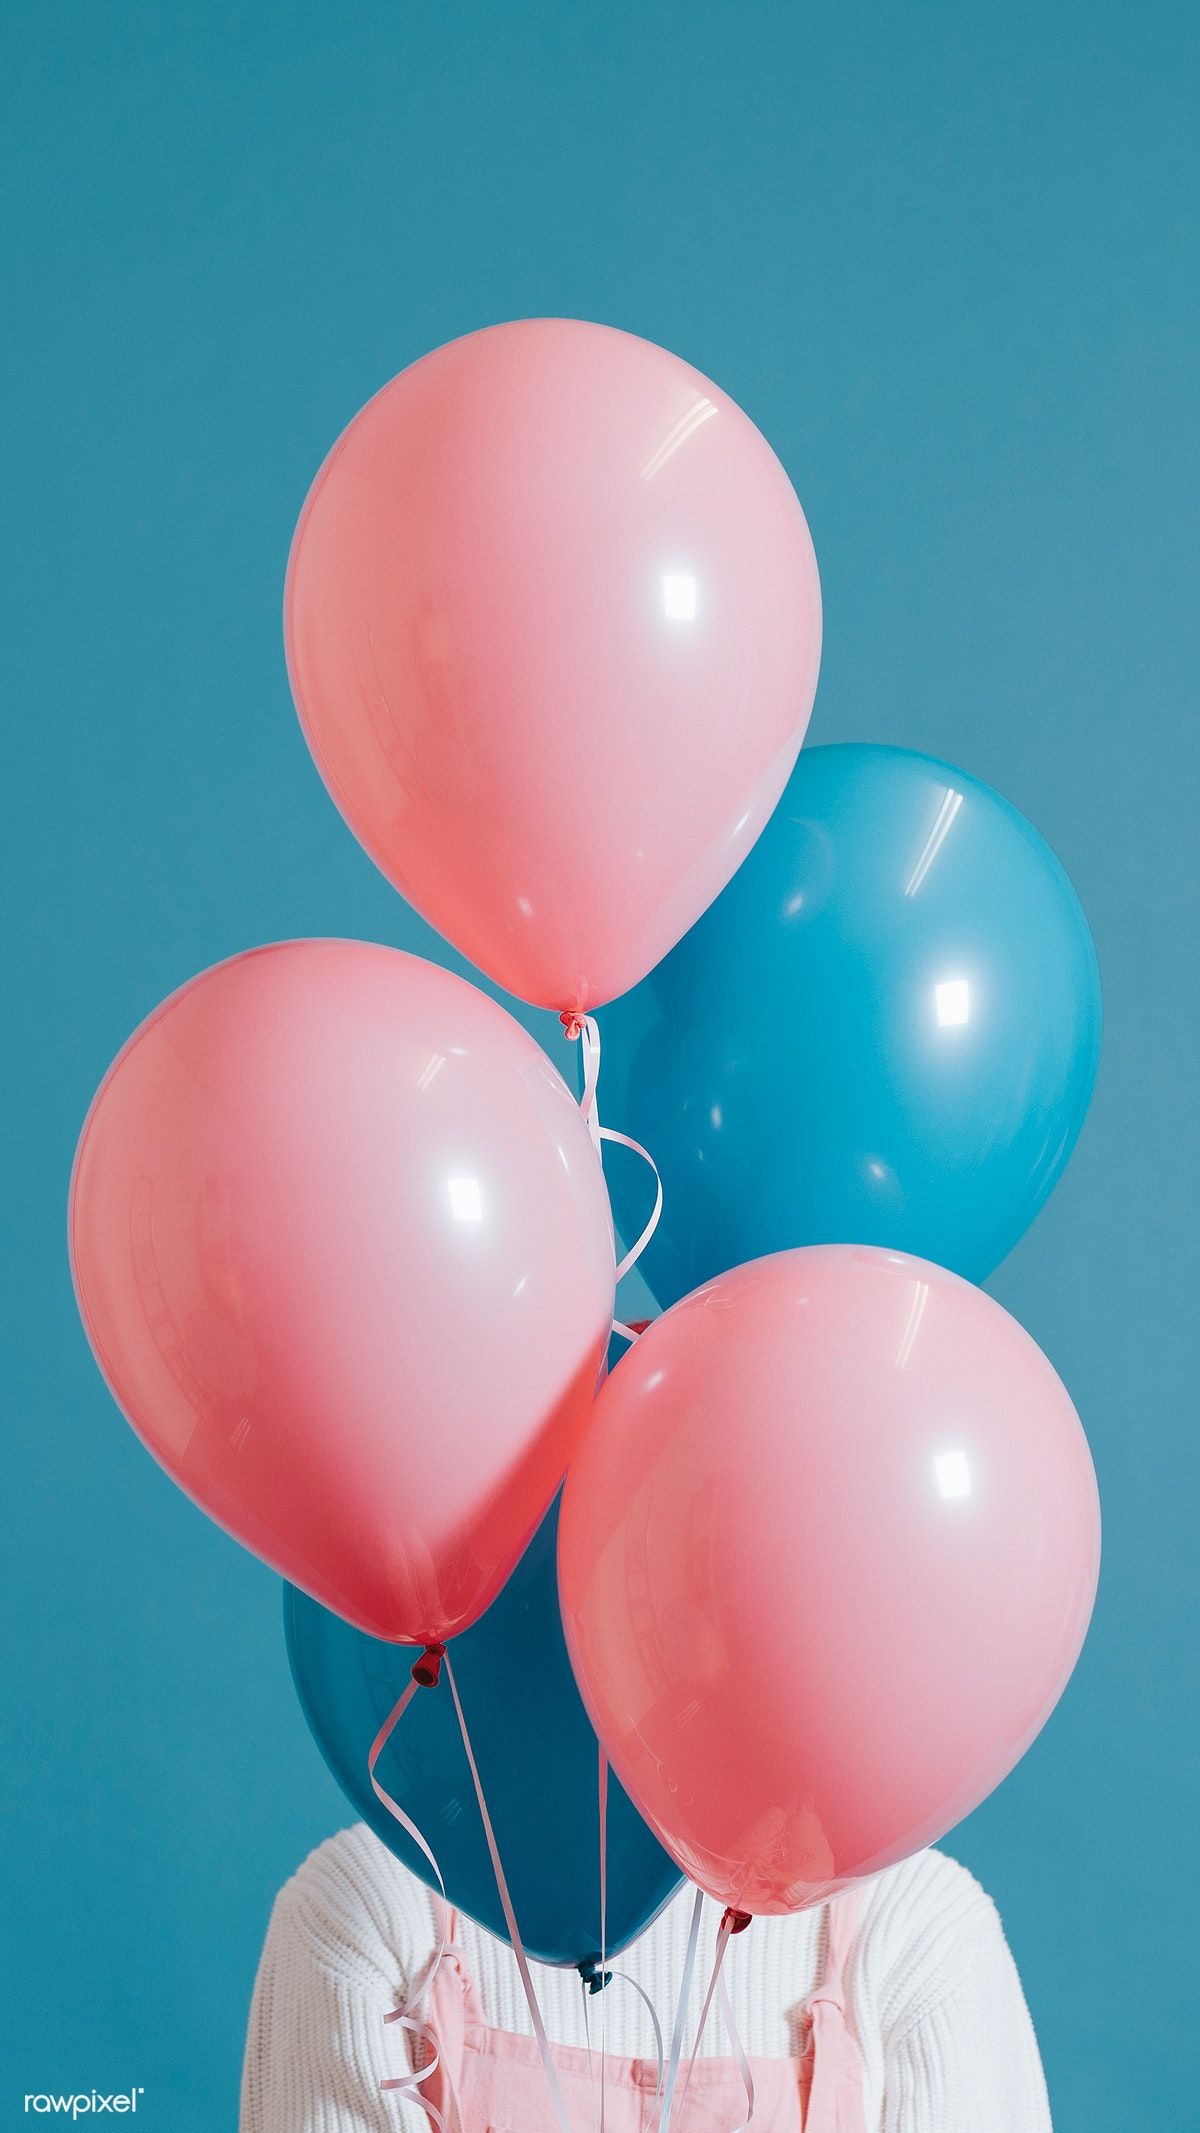 Aesthetic Balloons Wallpapers